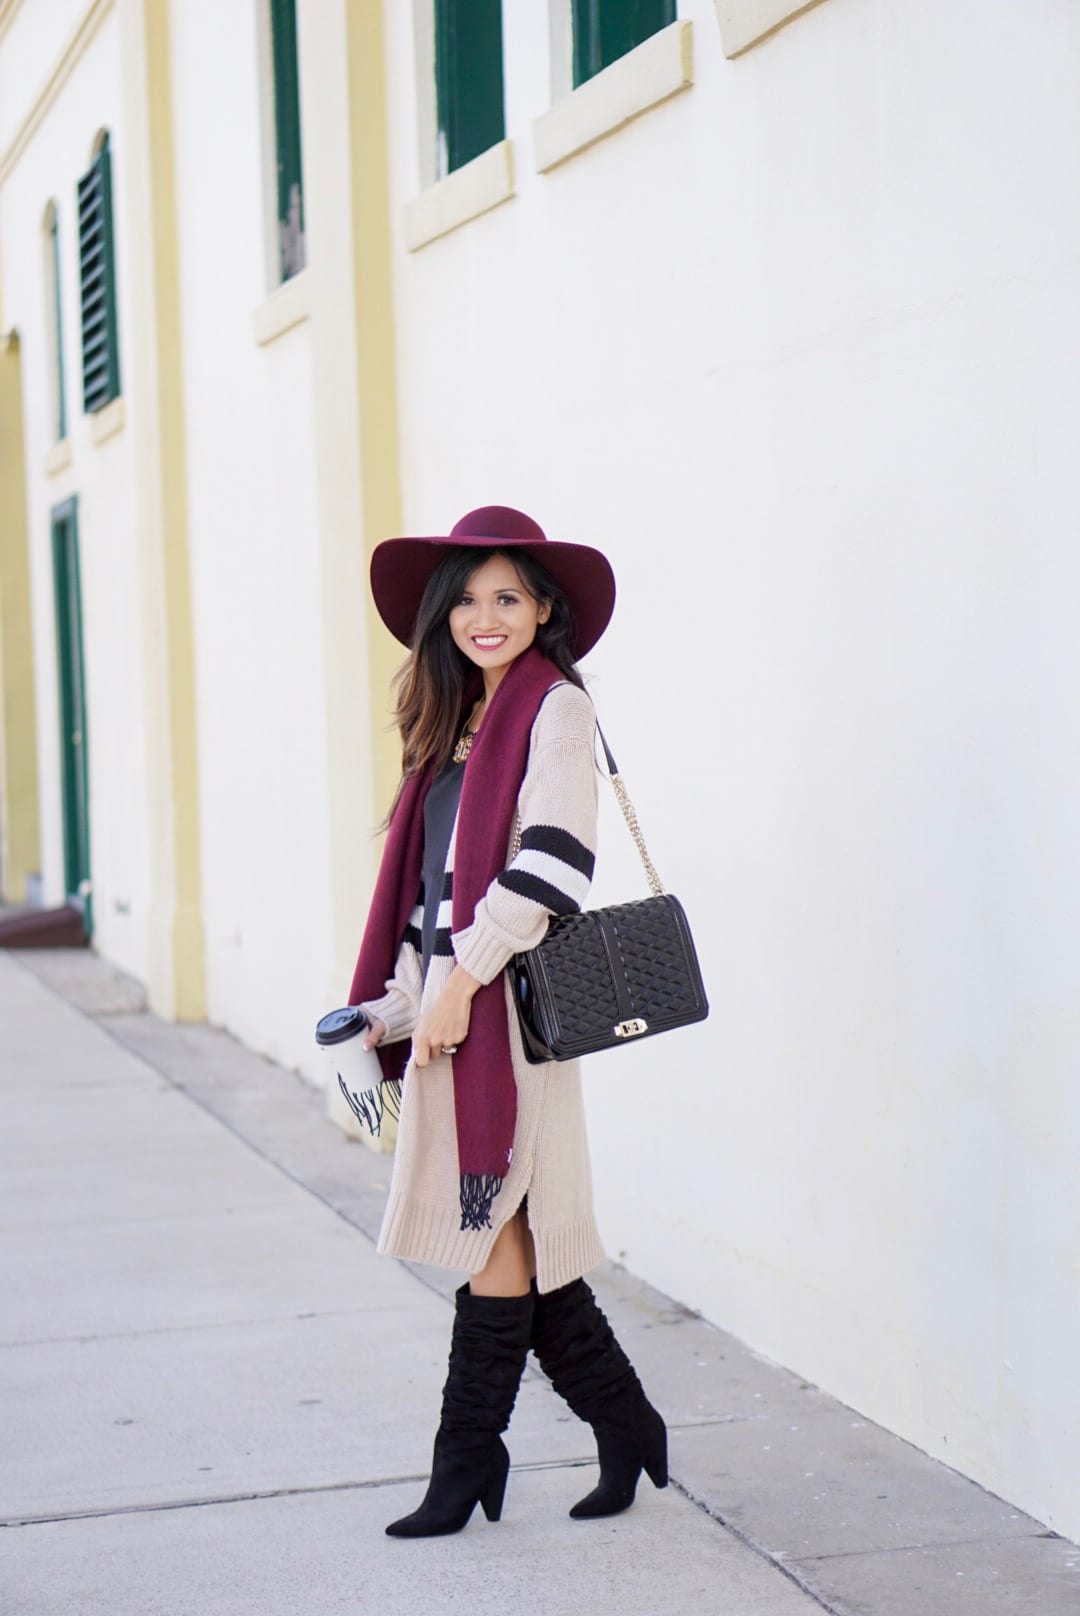 november favorites, fall accessories, Burgundy hat, floppy hat, fall accessories, beauty favorites, fashion favorites, slouchy boot, black boots, striped cardigan, goodnight macaroon, Rebecca minkoff love cross body, monogrammed necklace , black dress, fall dress, fall outfit, fall favorites 